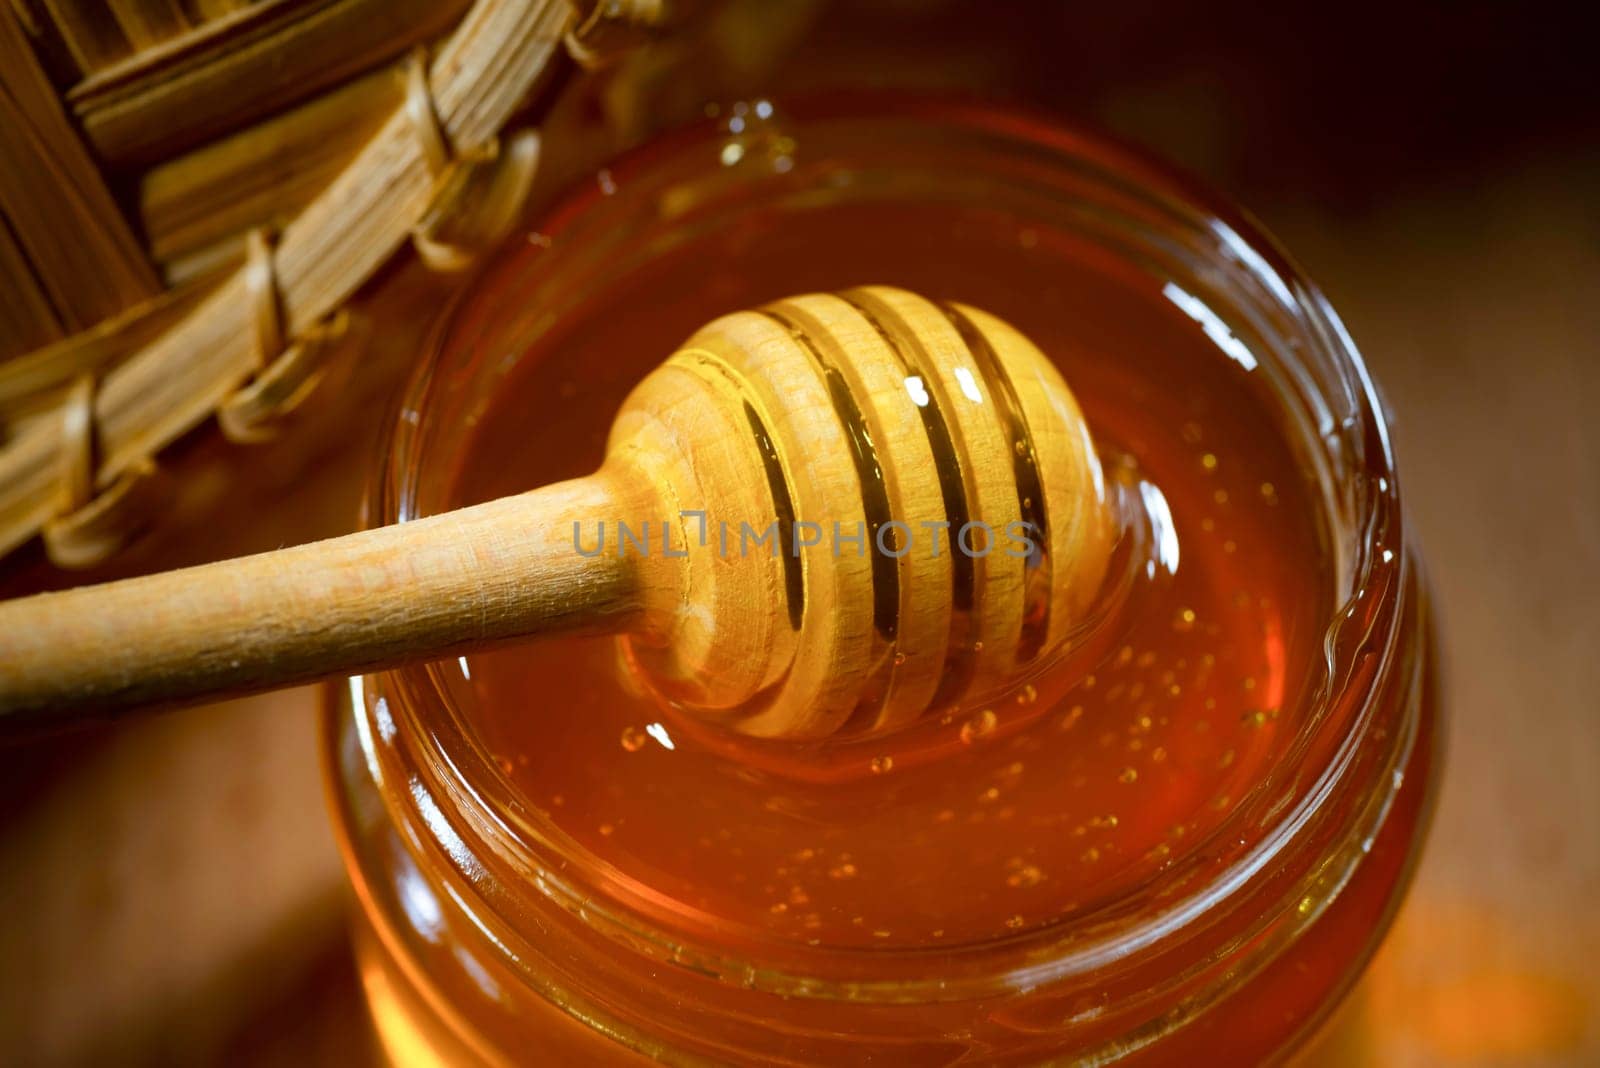 Liquid honey with a honey dipper in a glass jar on a wooden table. Healthy organic honey. Close-up, side view.